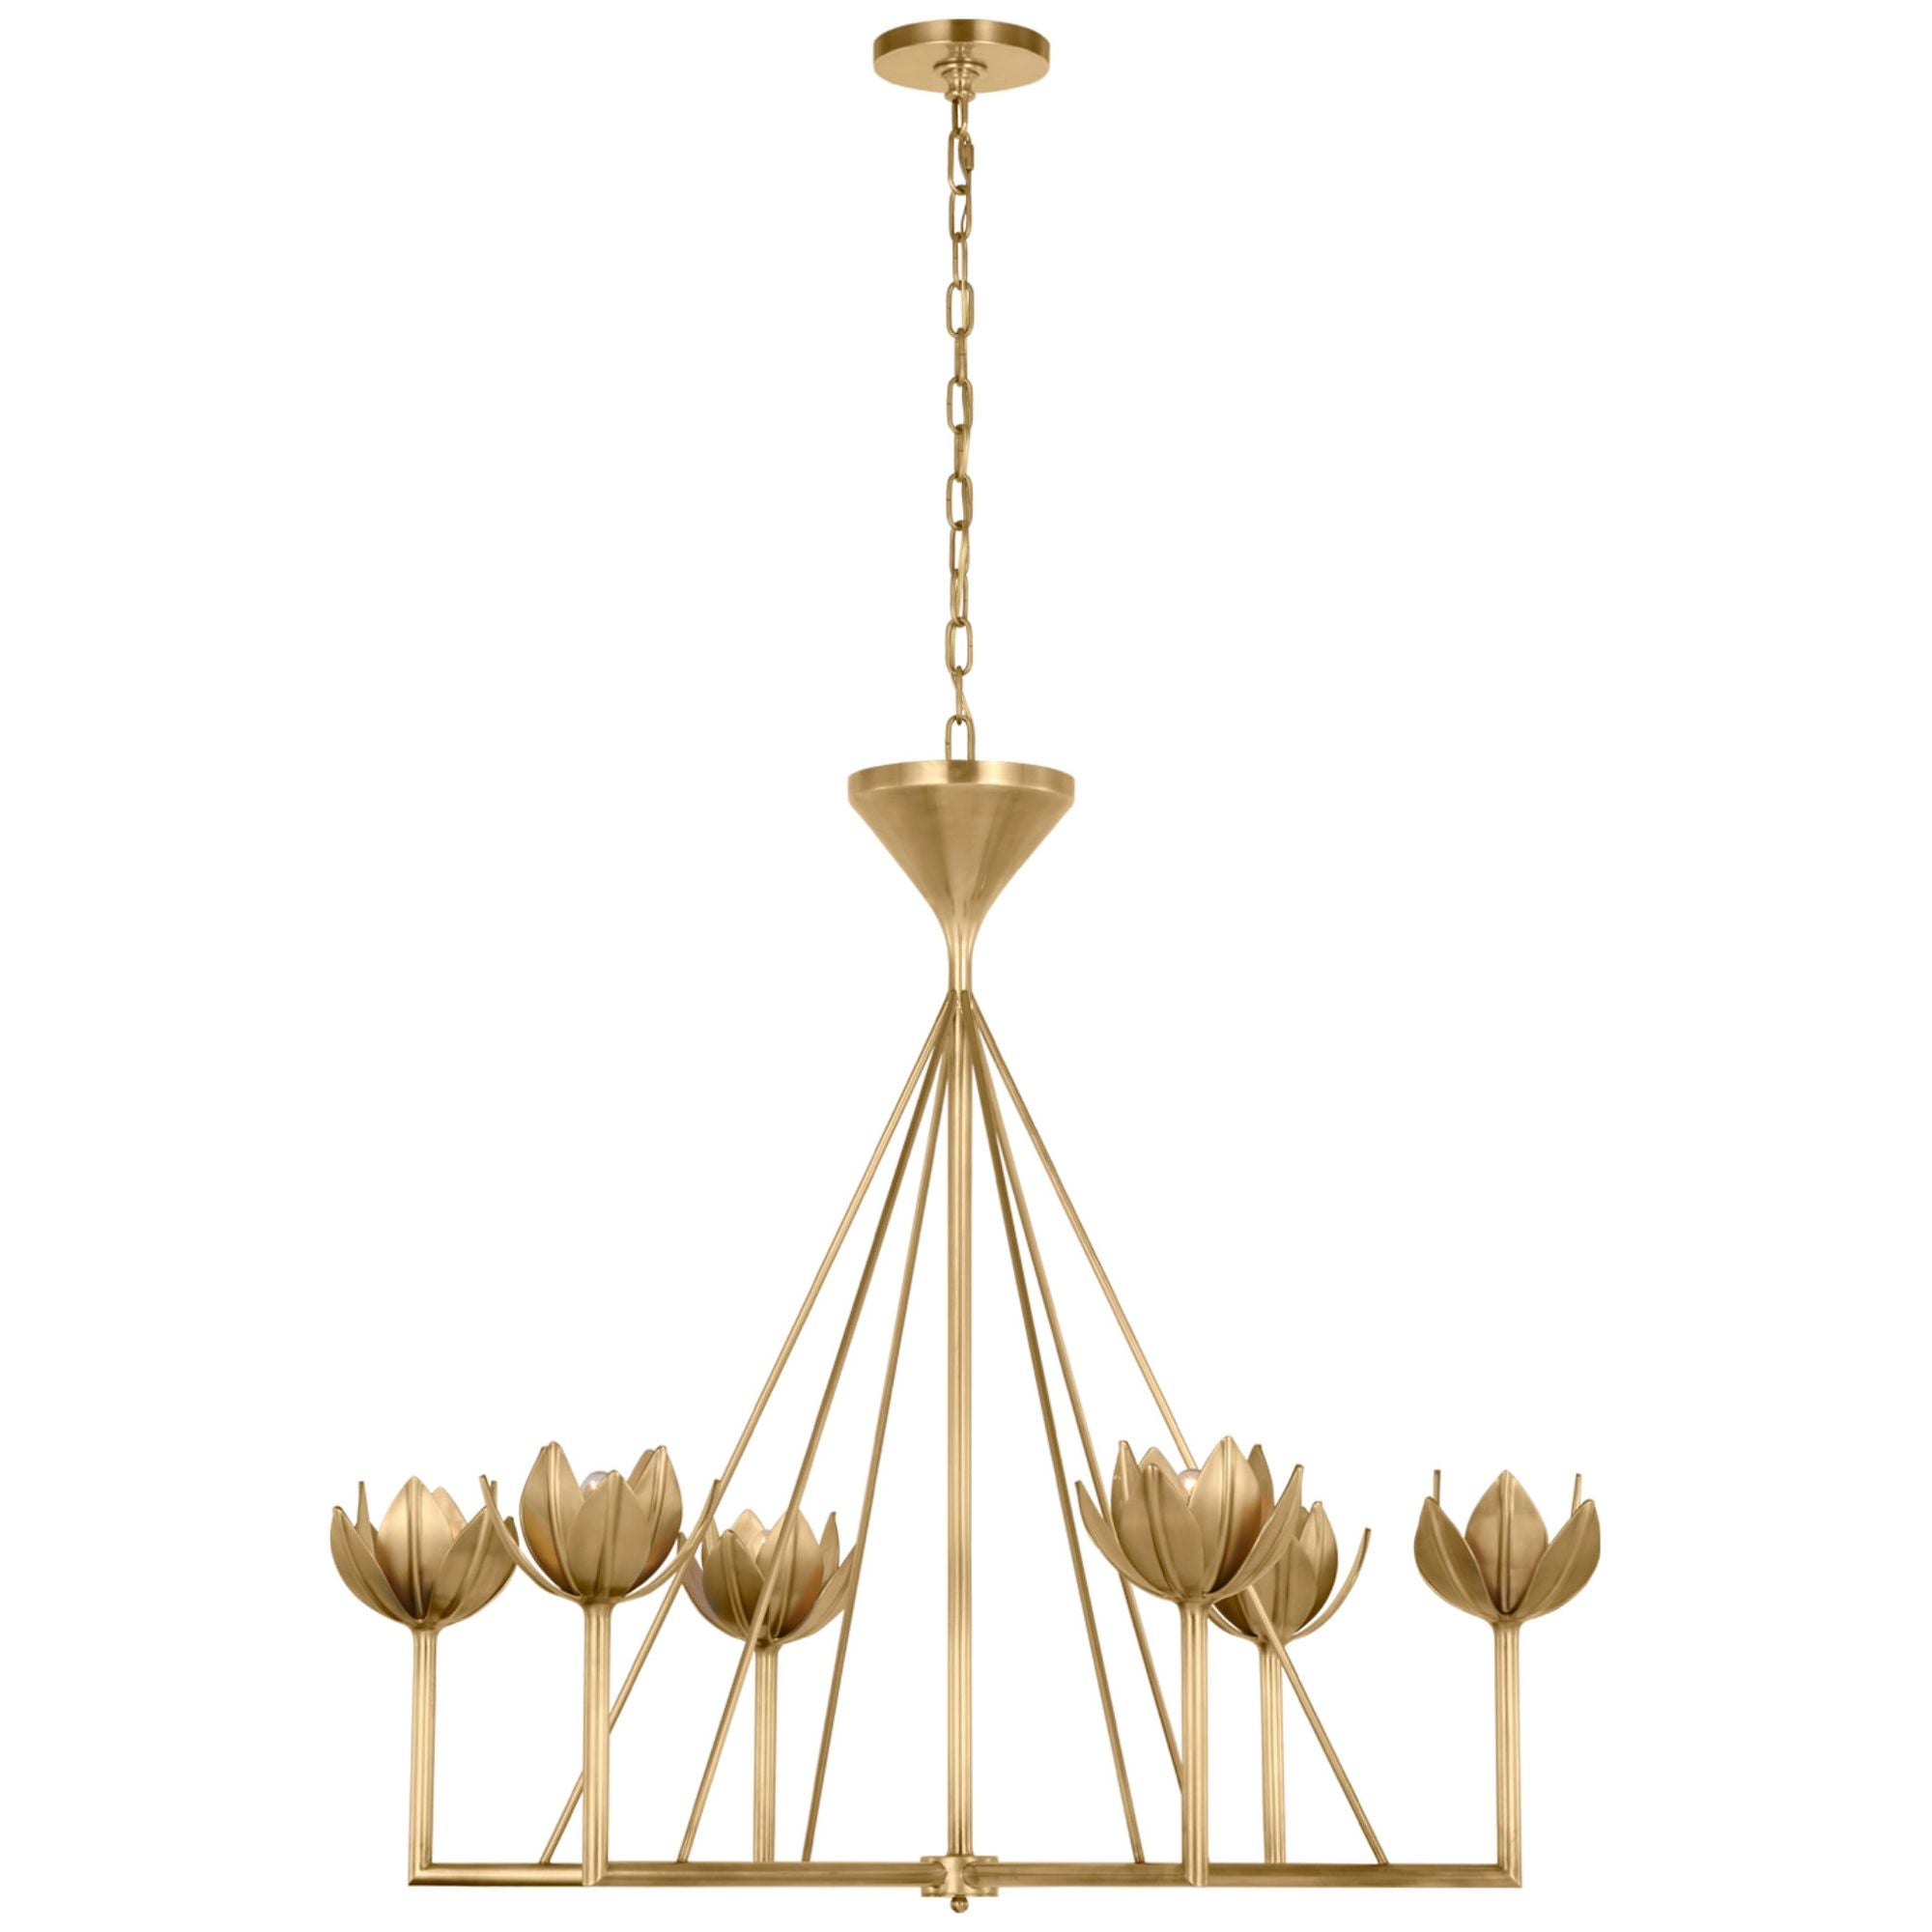 Julie Neill Alberto Large Low Ceiling Chandelier in Antique-Burnished Brass